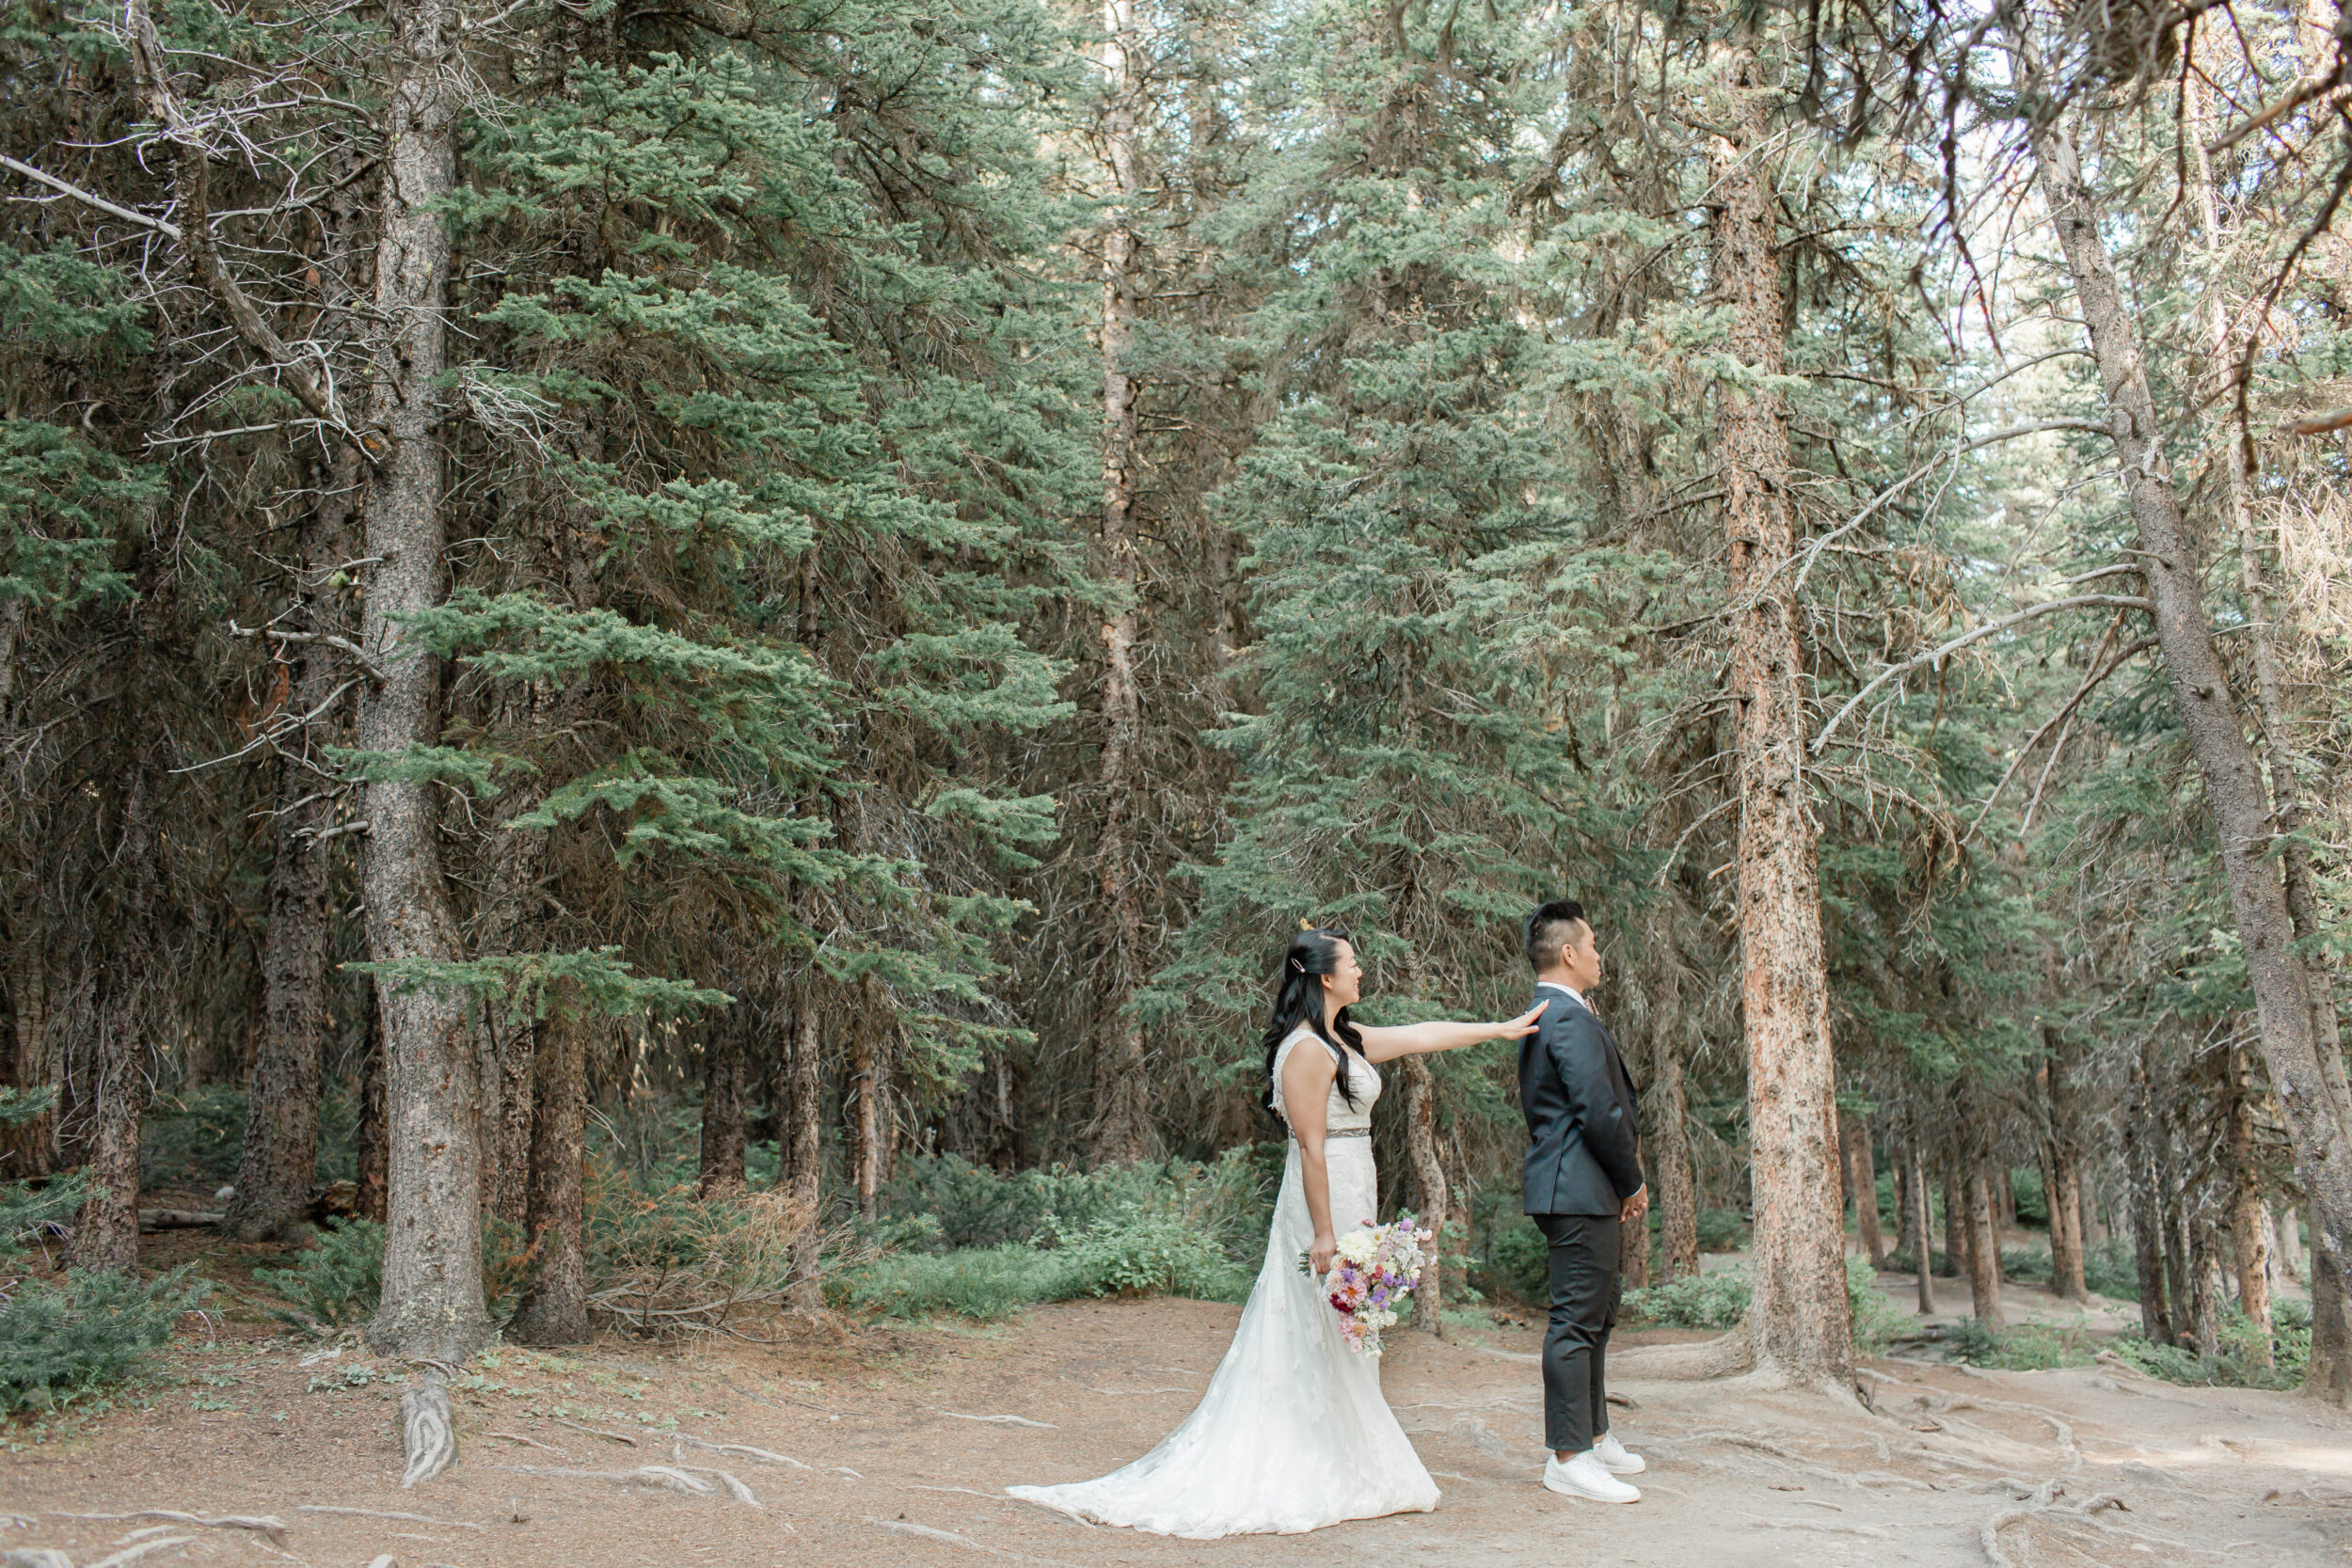 A couple shares a first look before their intimate Banff wedding.